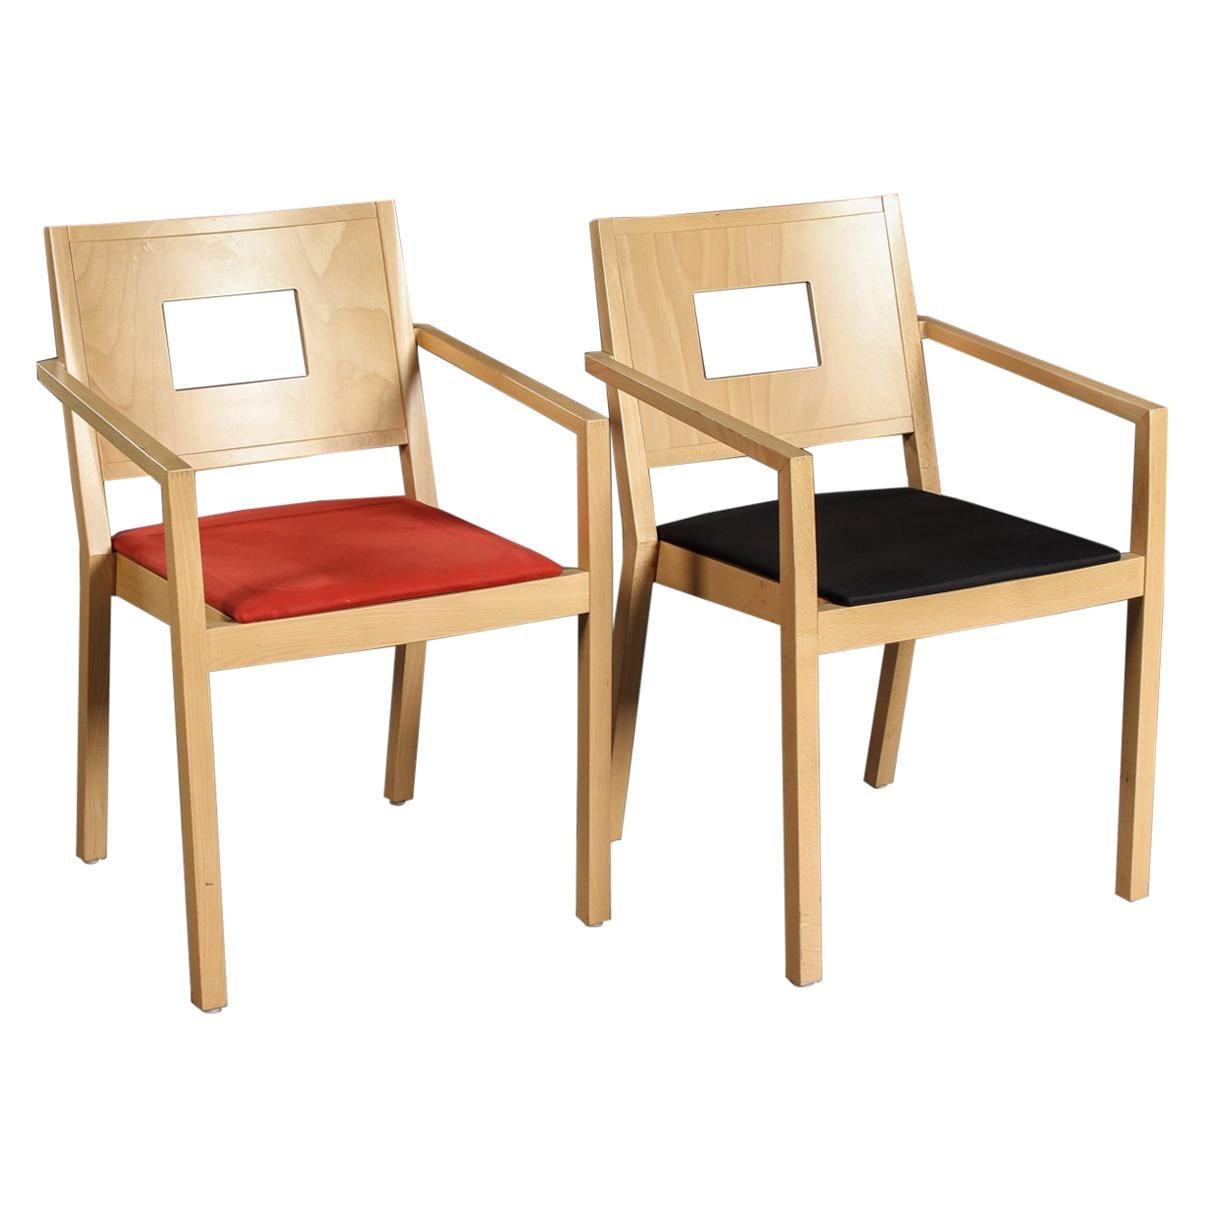 Pair of Beechwood Stacking Chairs by Brunner